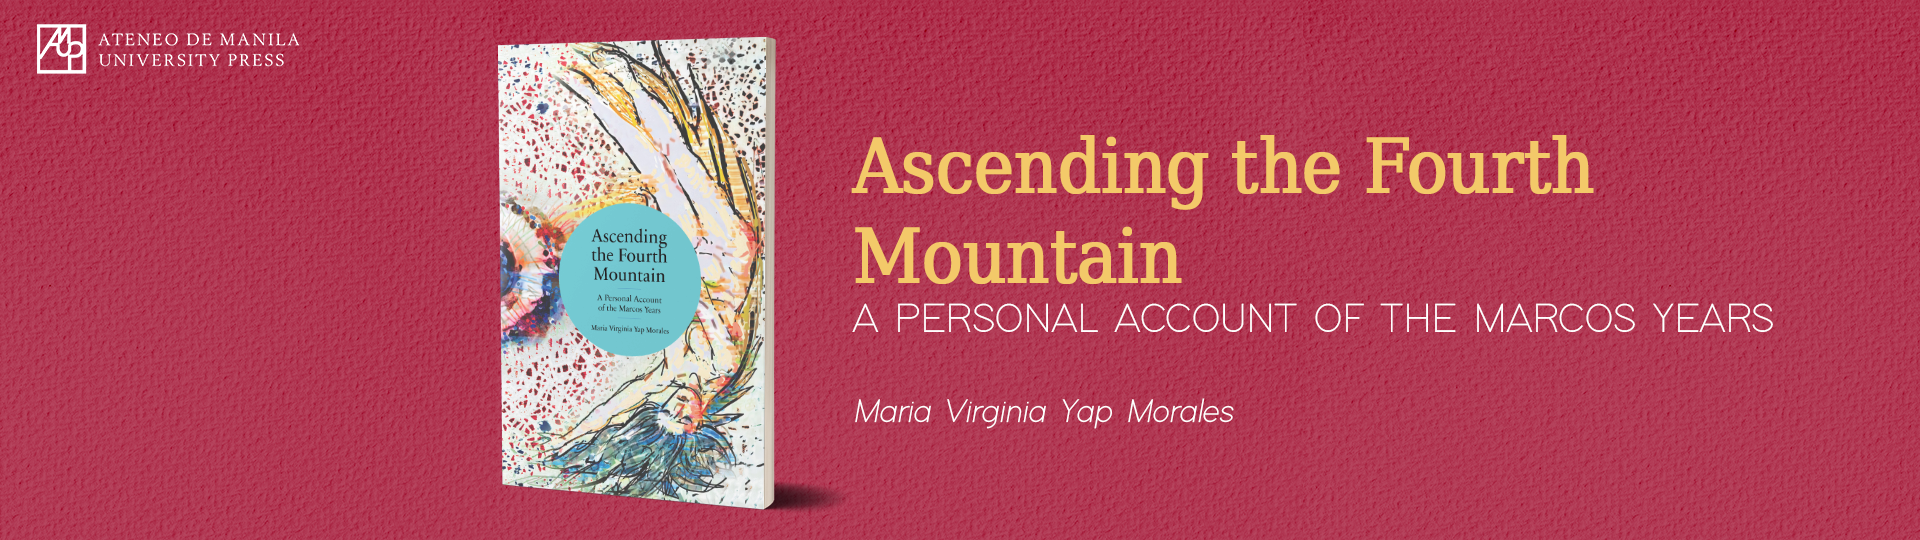 5 must-read book for Women's Month - Ascending the Fourth Mountain